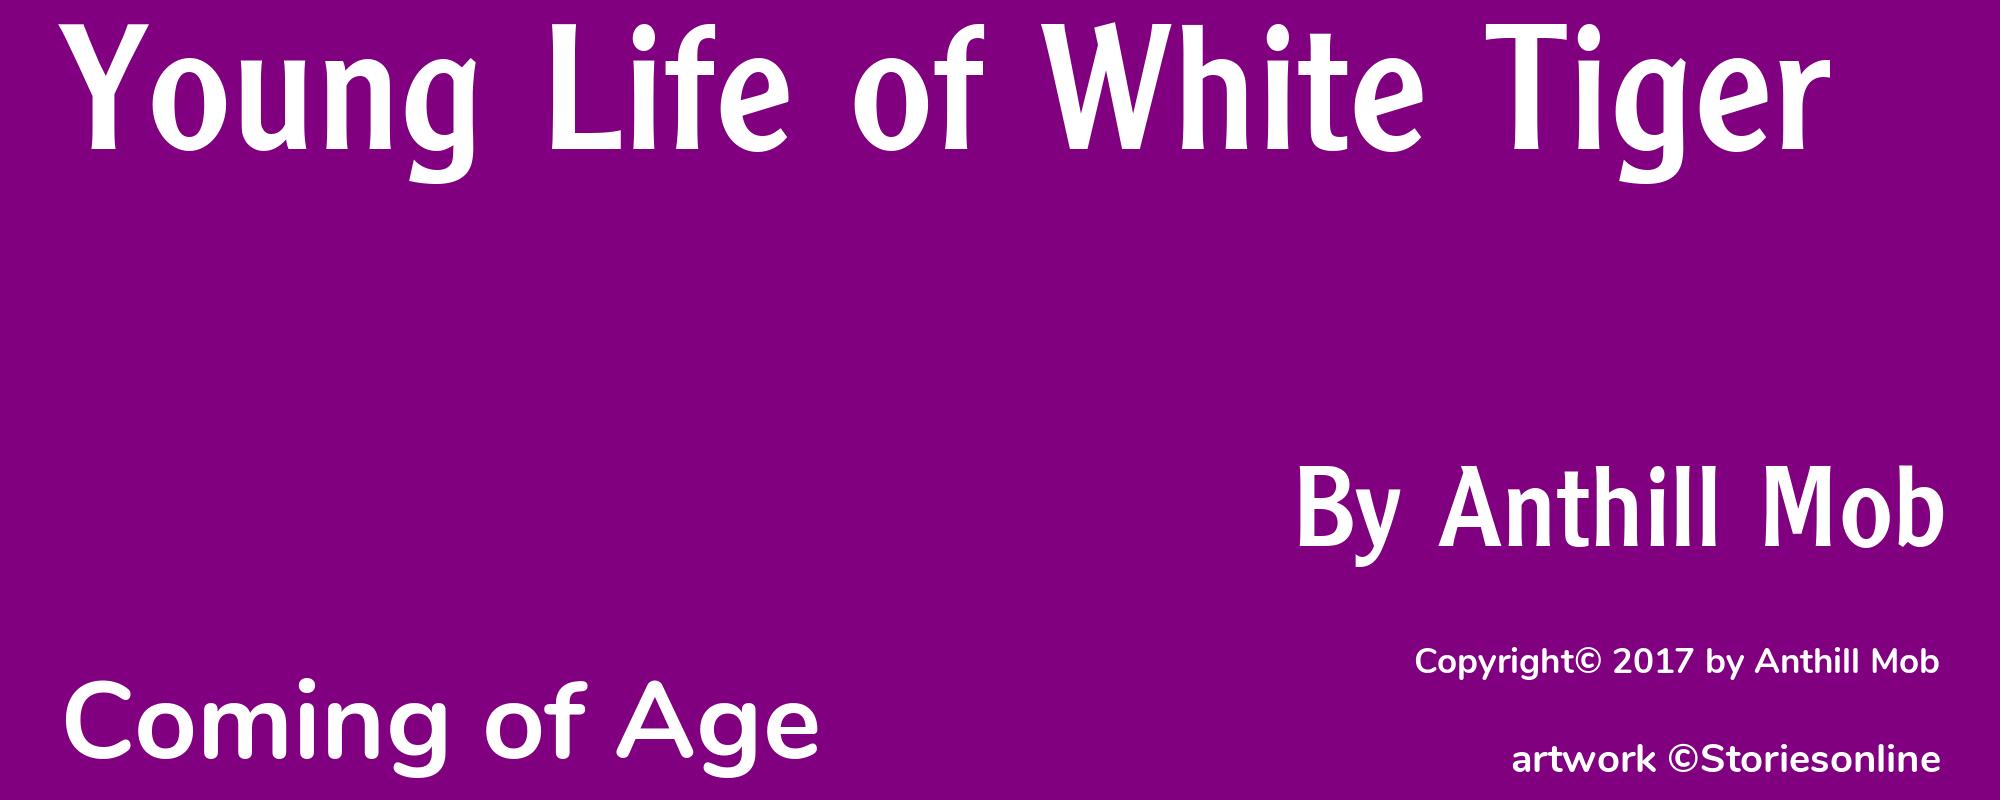 Young Life of White Tiger - Cover